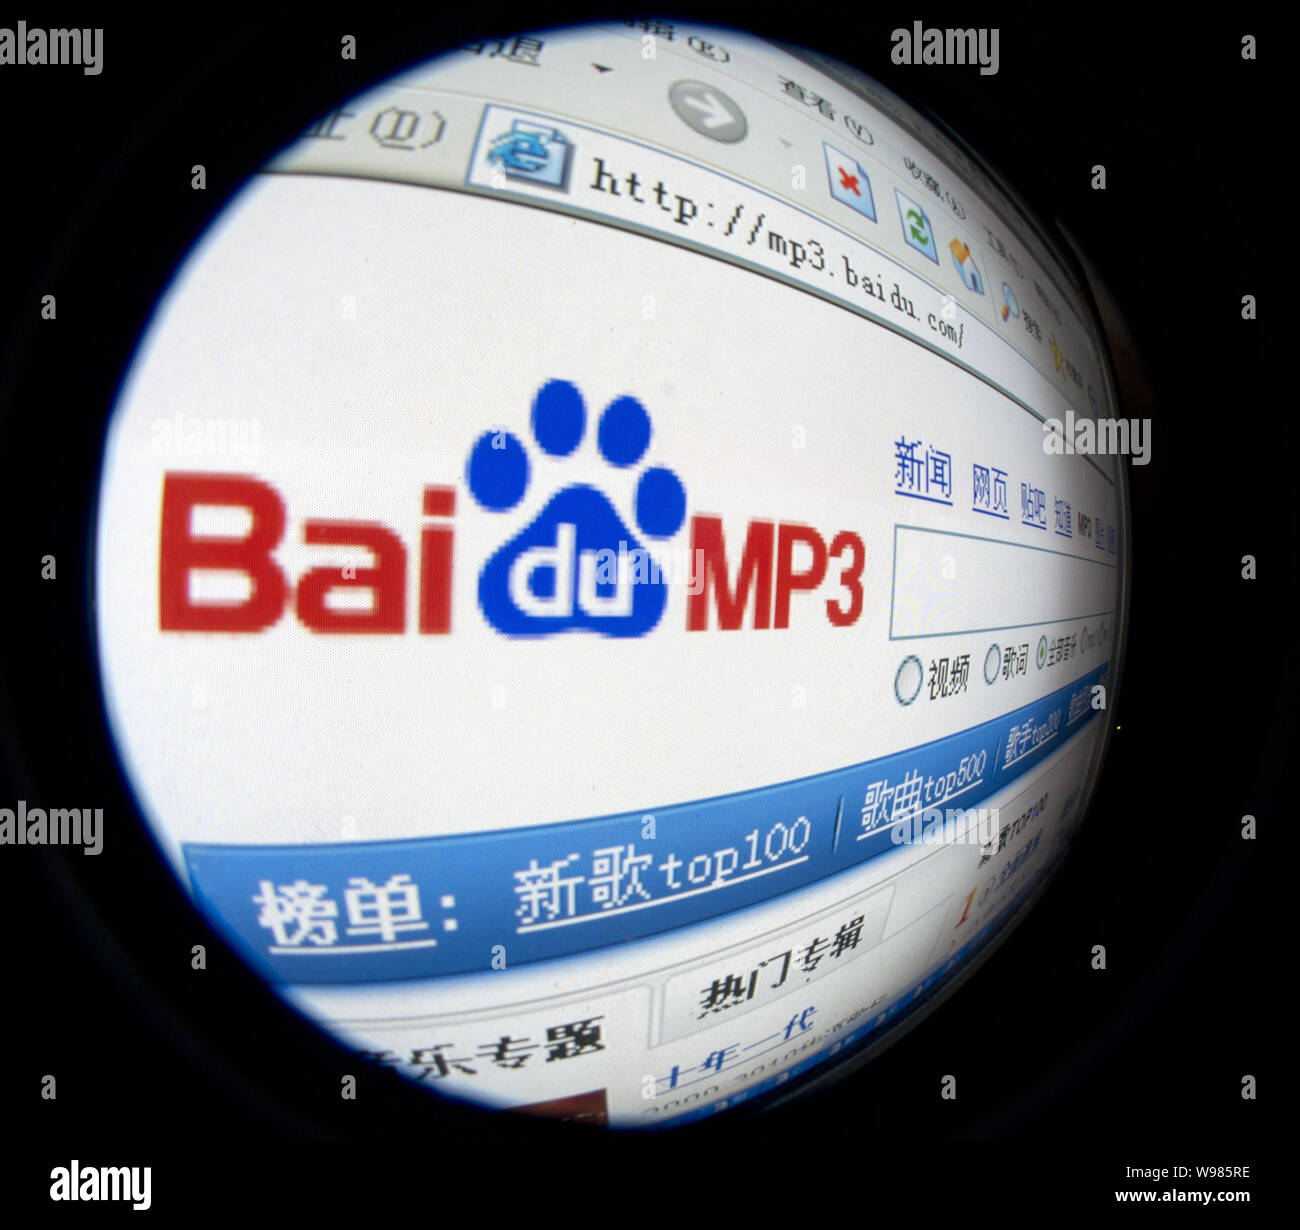 A Chinese Internet user browses mp3.baidu.com, the online music material  share platform on Baidu.com, in Shaoyang city, central Chinas Hunan  province Stock Photo - Alamy